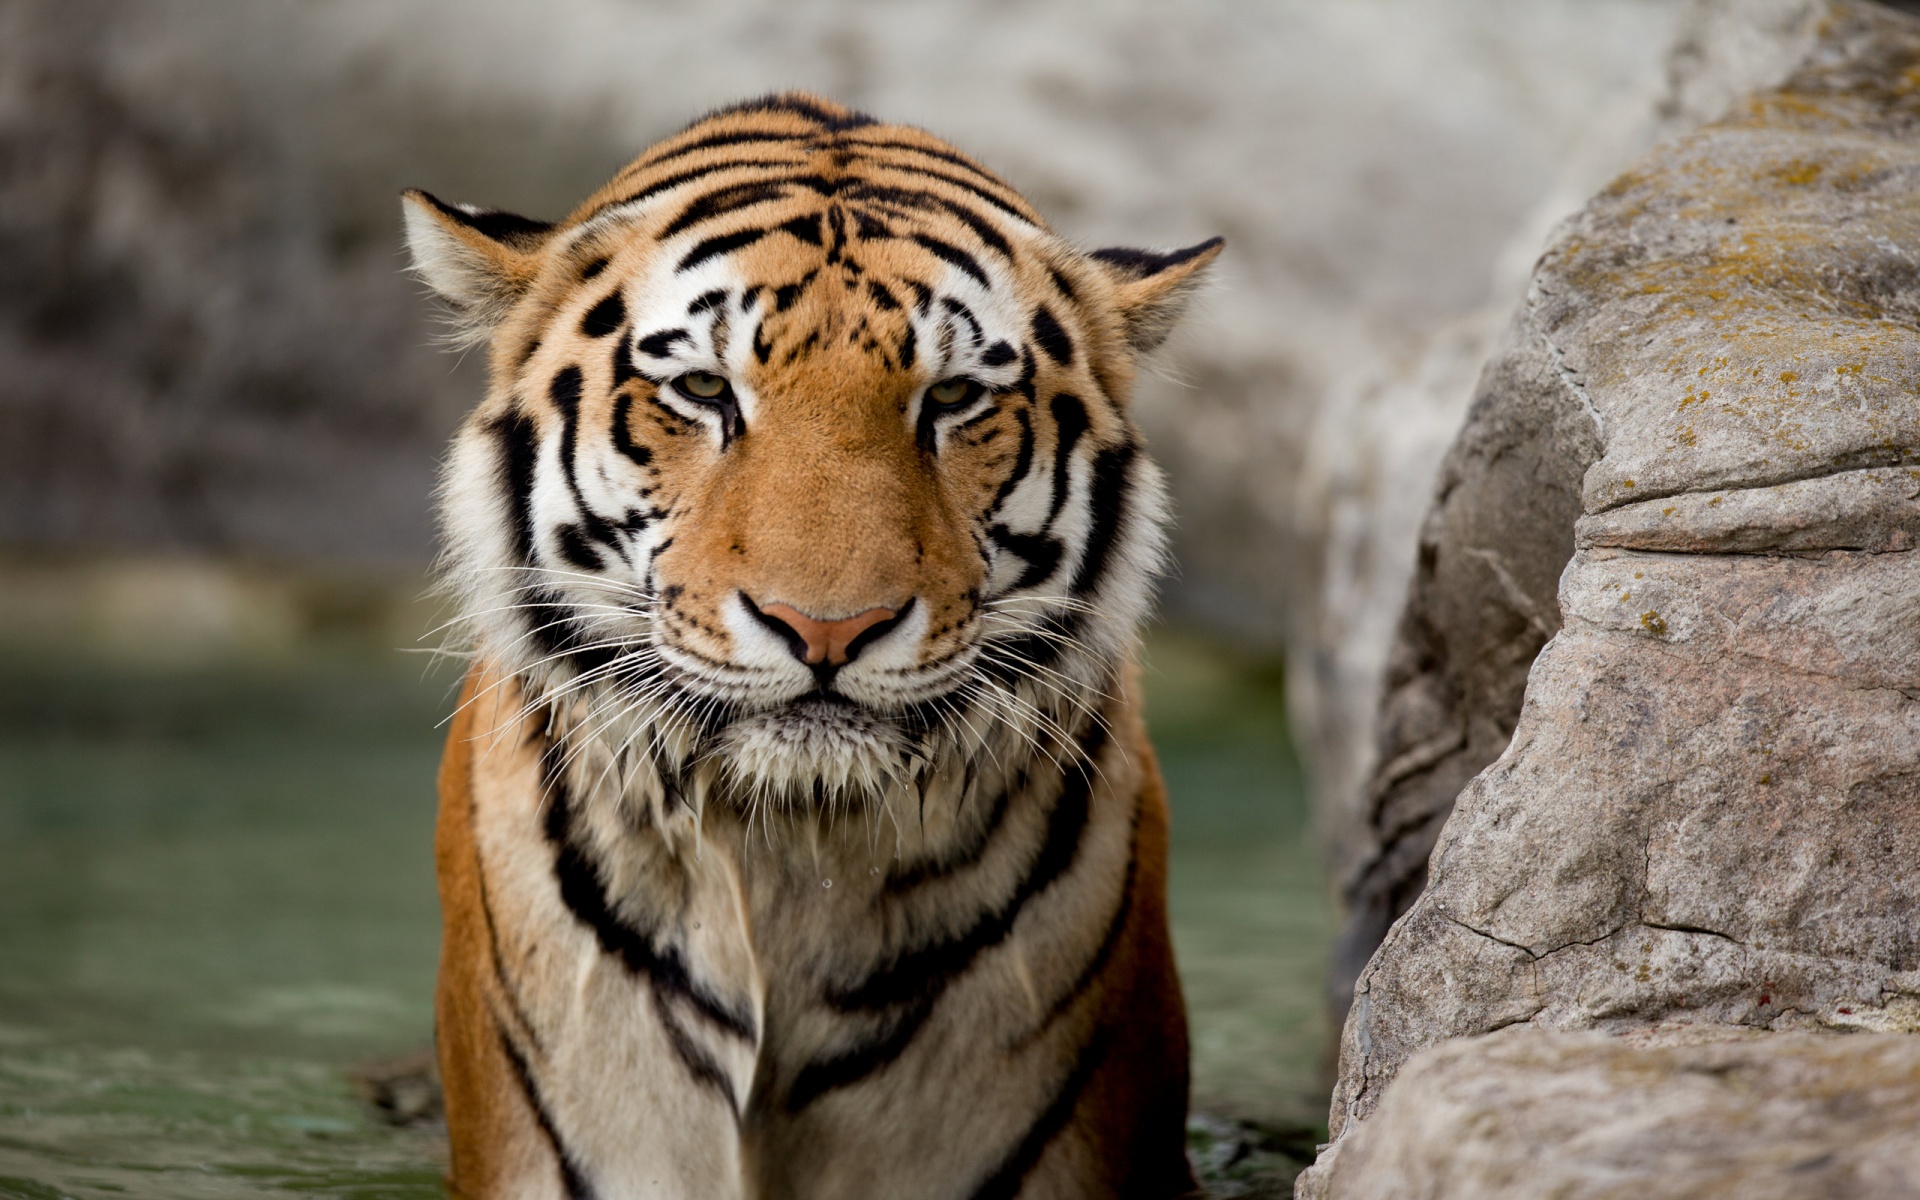 tiger photos | Desktop Backgrounds for Free HD Wallpaper | wall ...